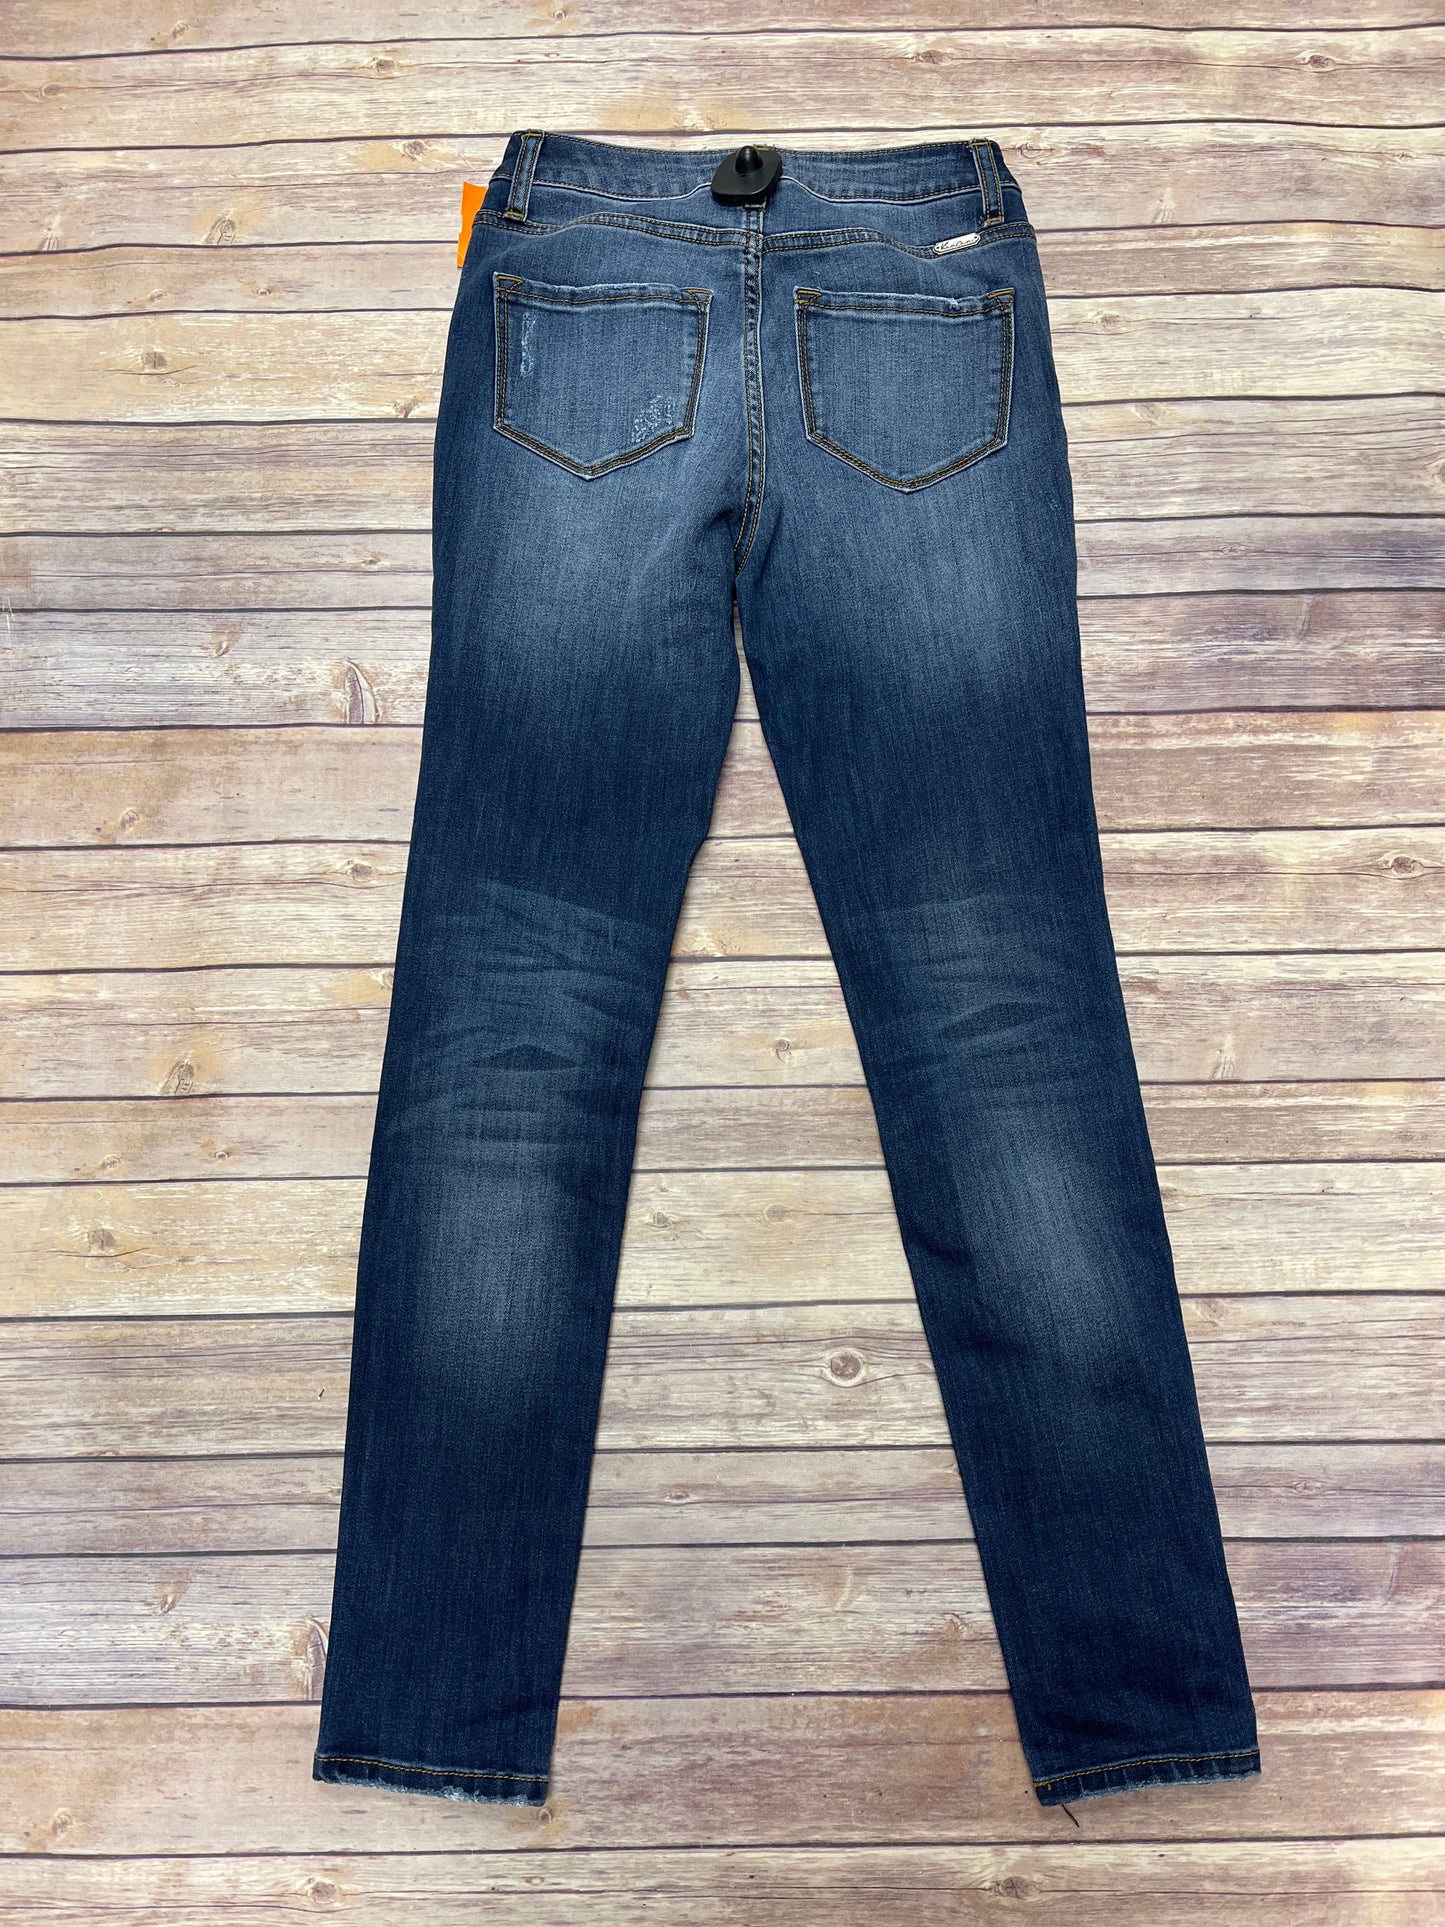 Jeans Skinny By Kancan  Size: 2 (3/25)